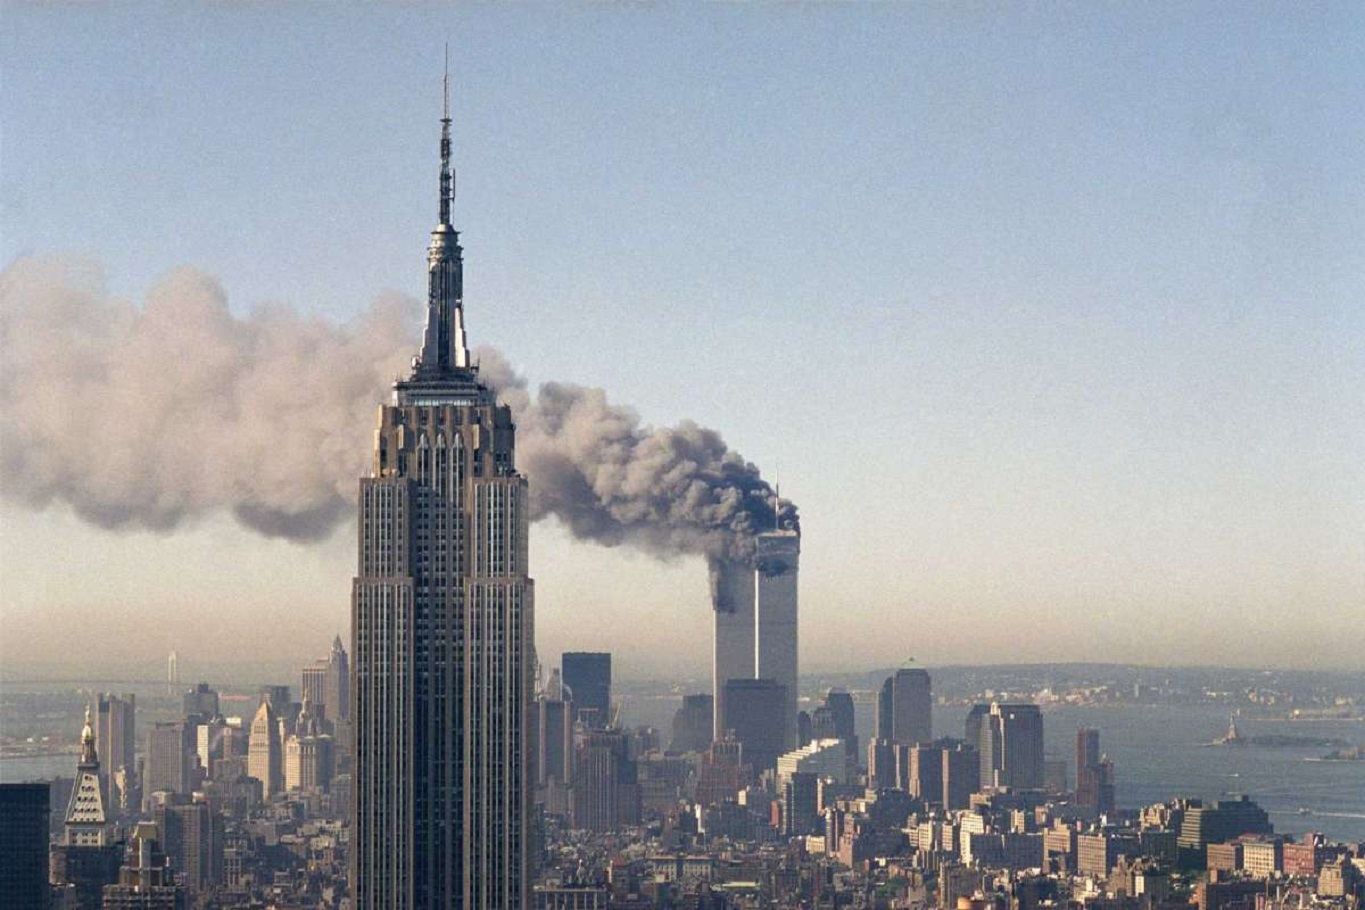 9/11 and the Politics of Fear and Self-Preservation